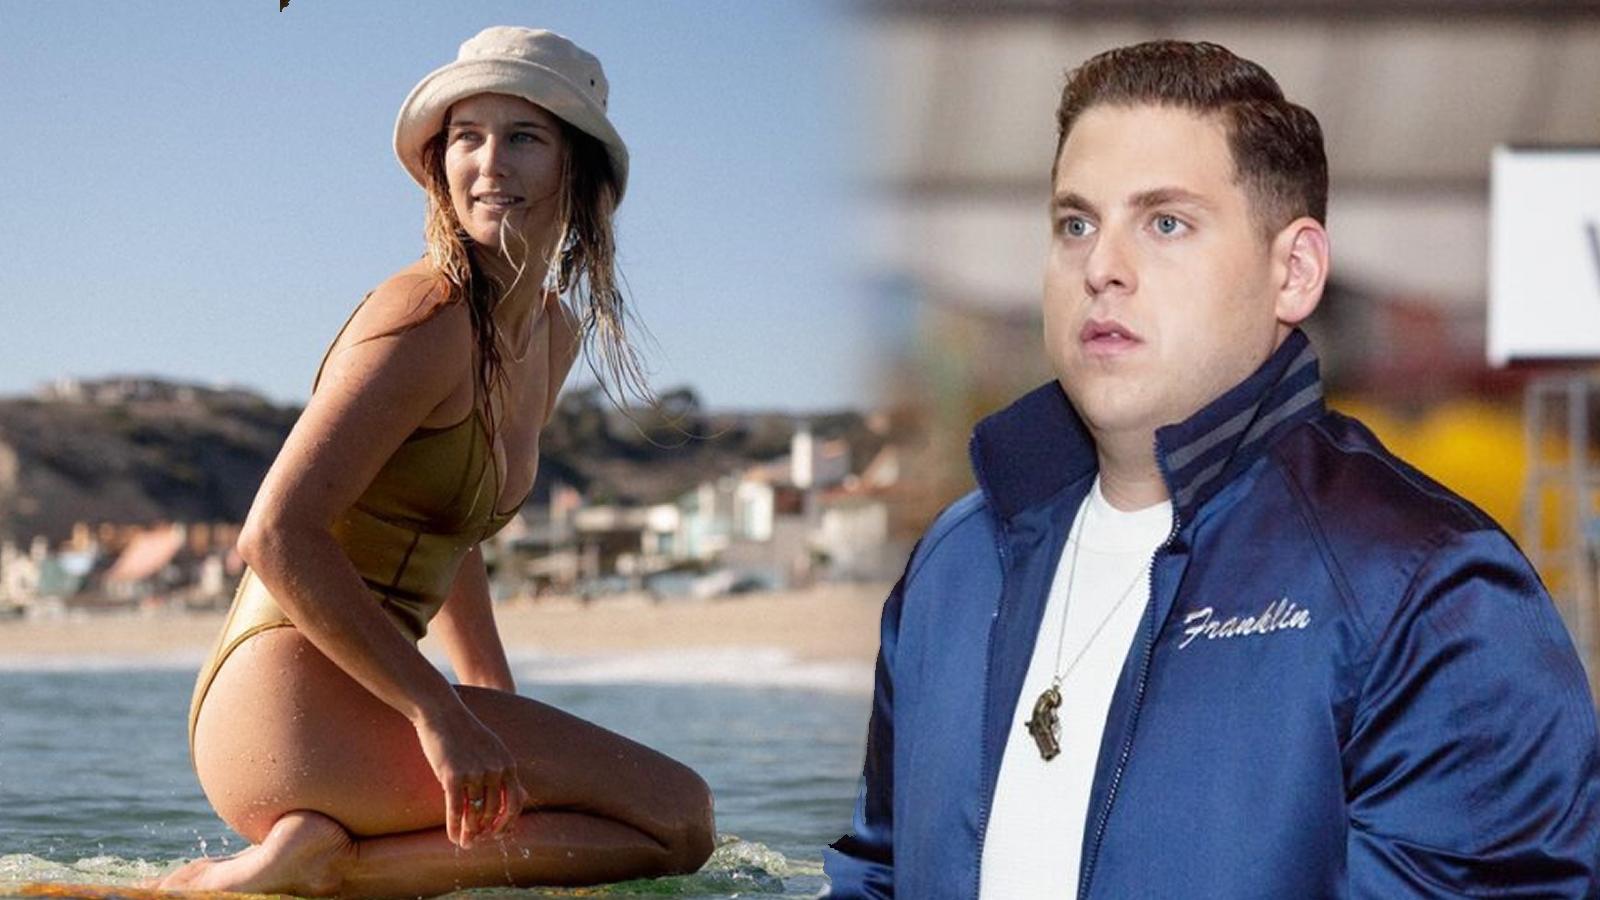 Internet backlash mounts against Jonah Hill in light of exposed messages